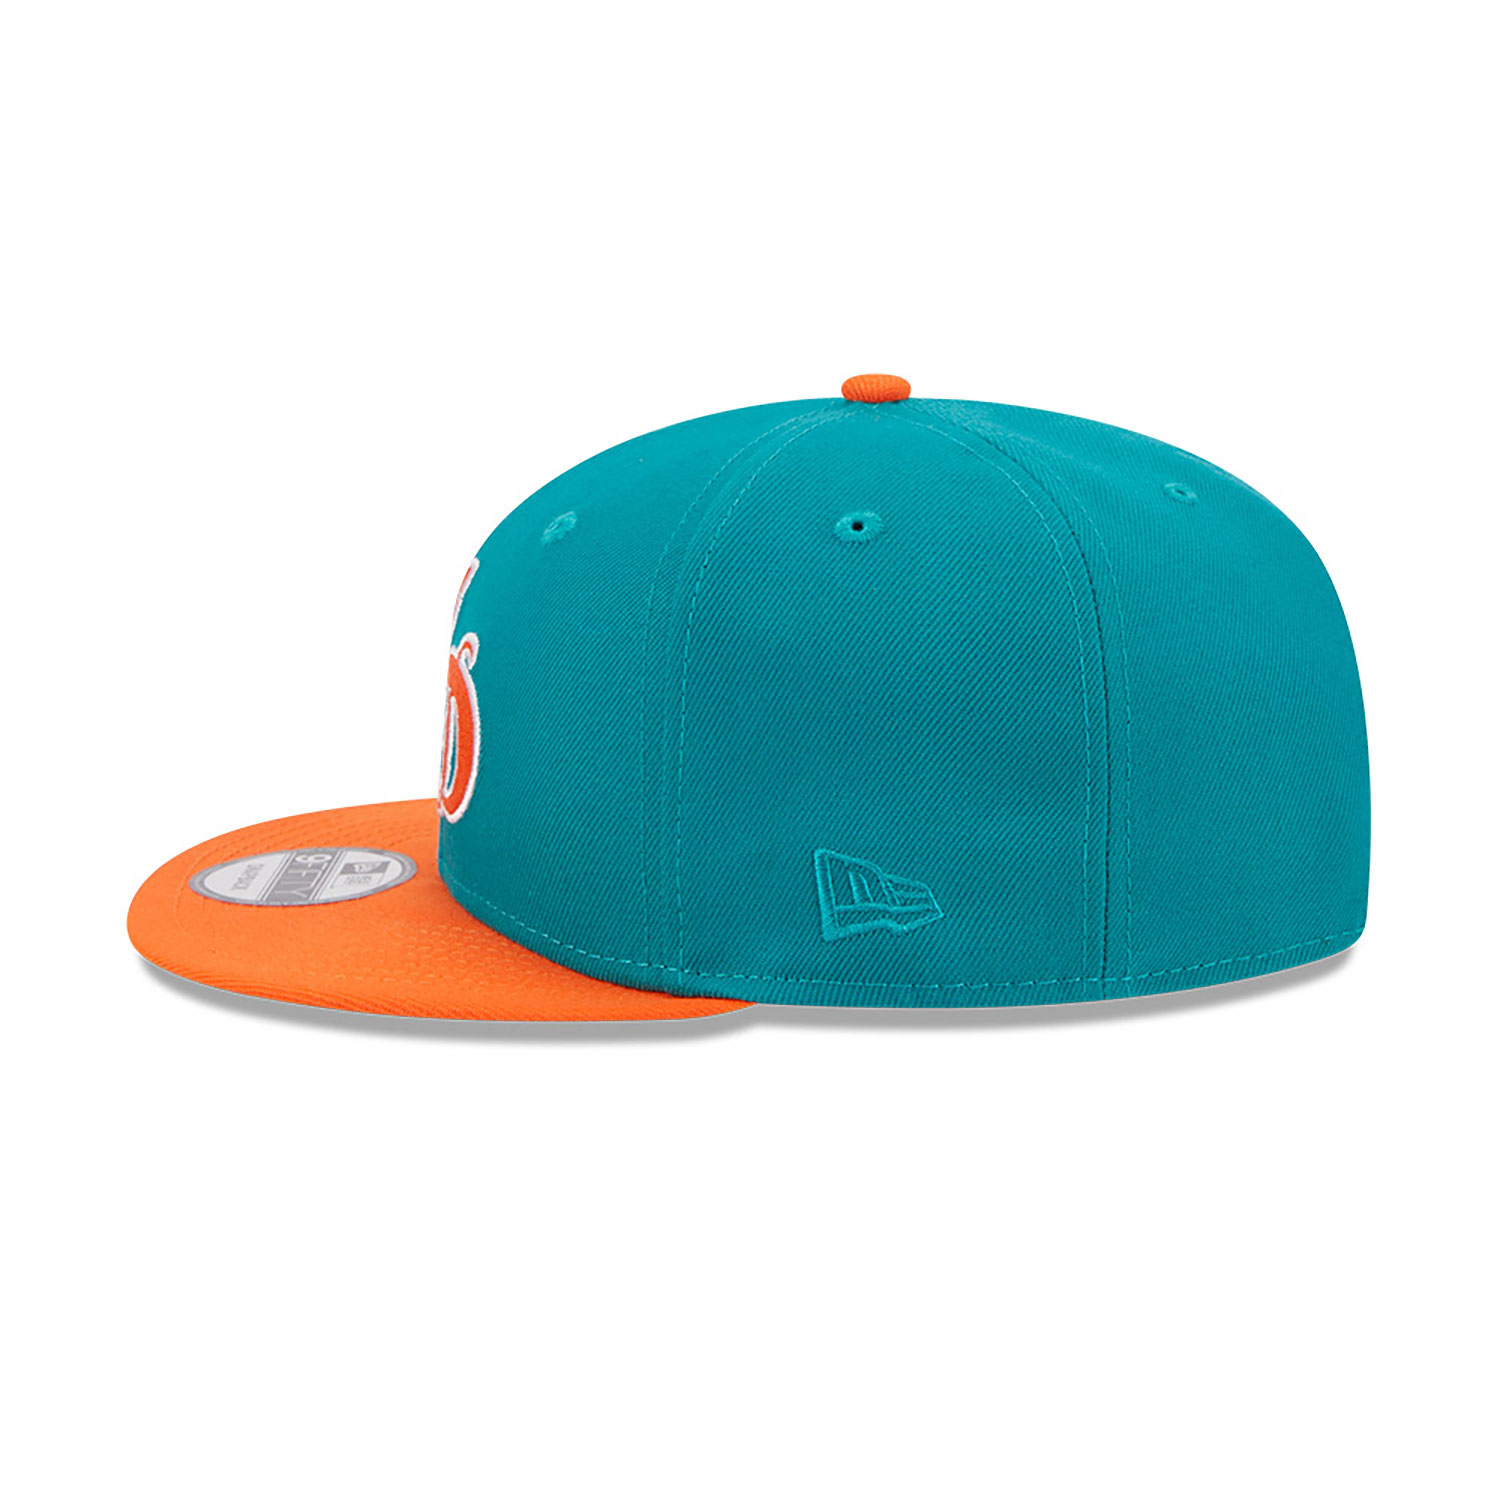 Miami Dolphins NFL City Originals Turquoise 9FIFTY Snapback Cap